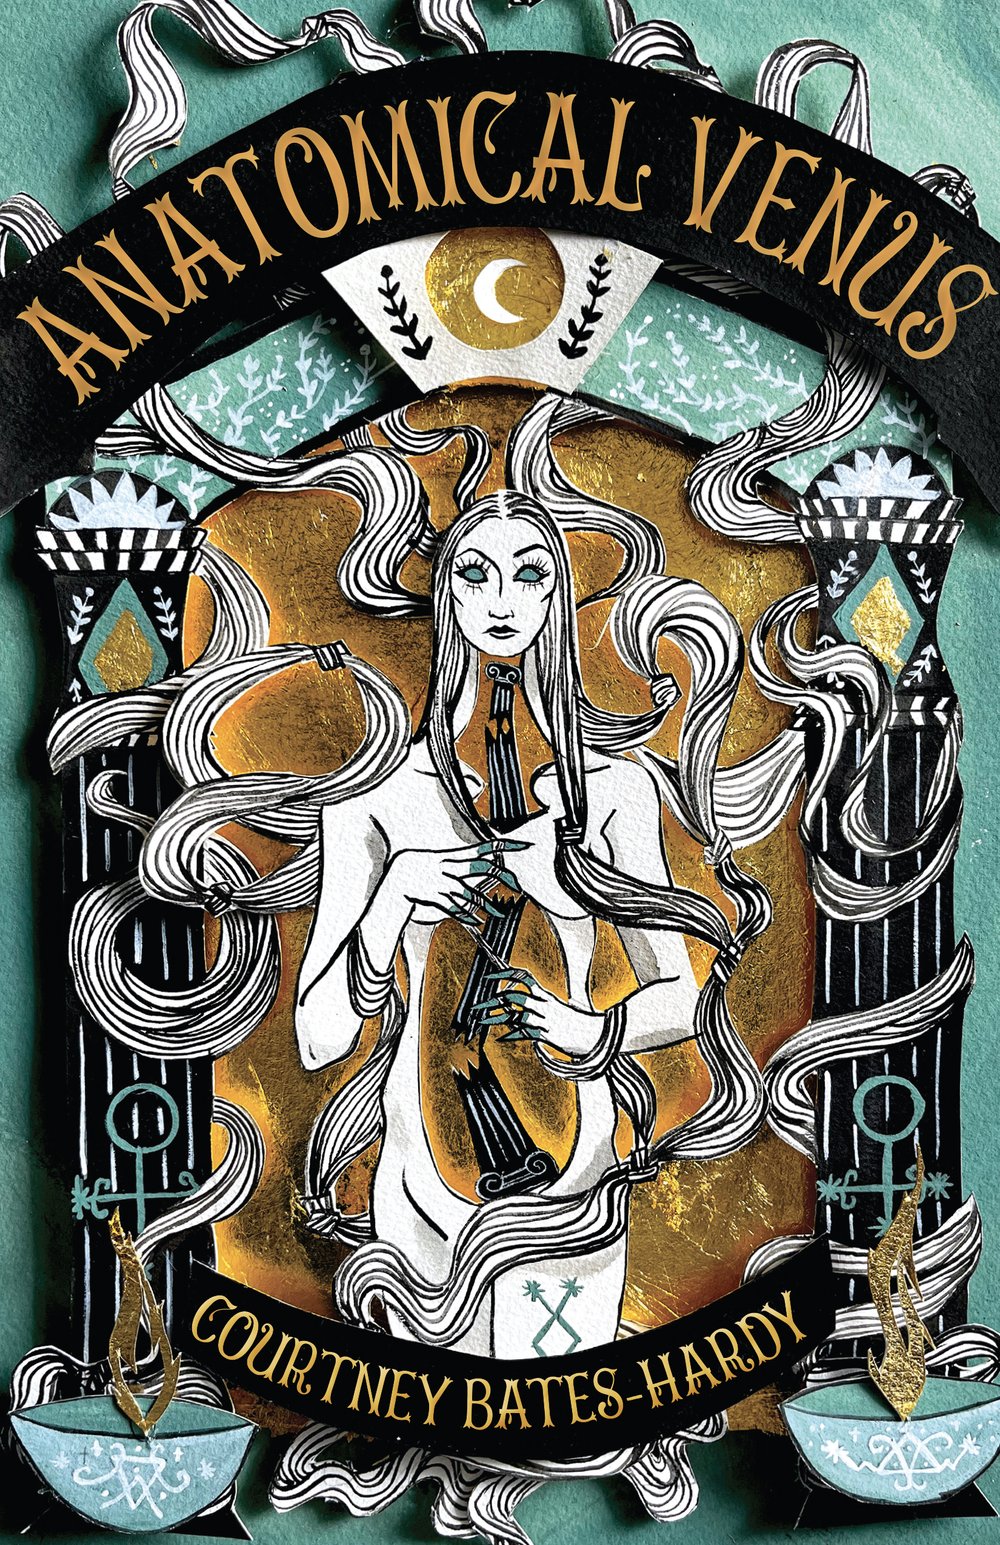 The cover of Anatomical Venus by Courtney Bates-Hardy.